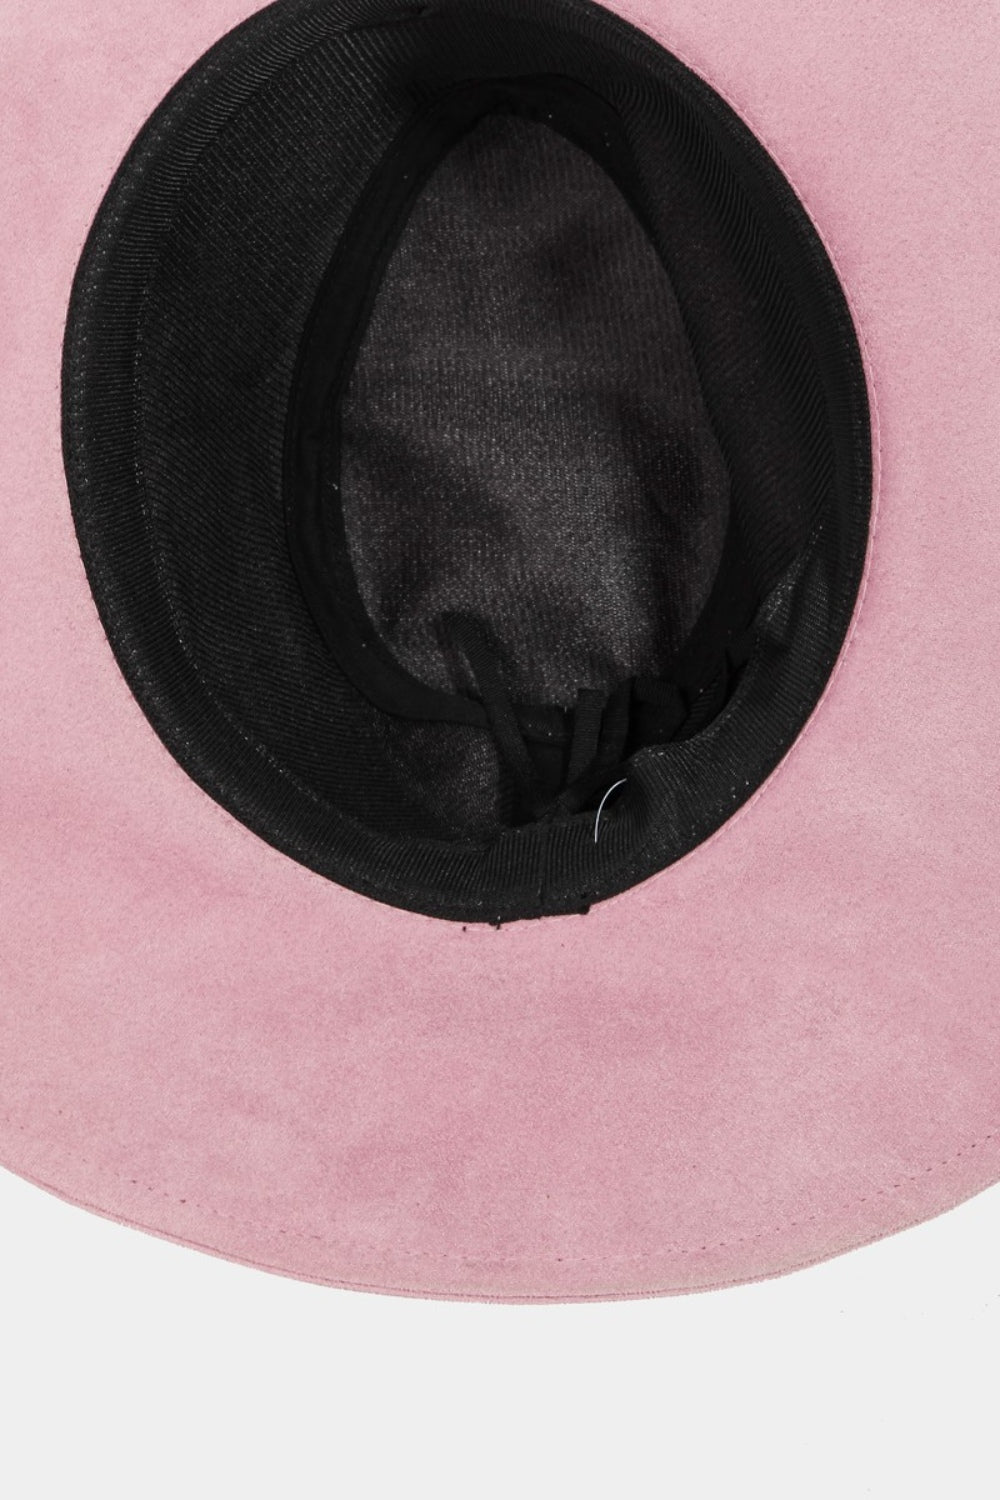 Fame Braided Faux Suede Hat - OMG! Rose